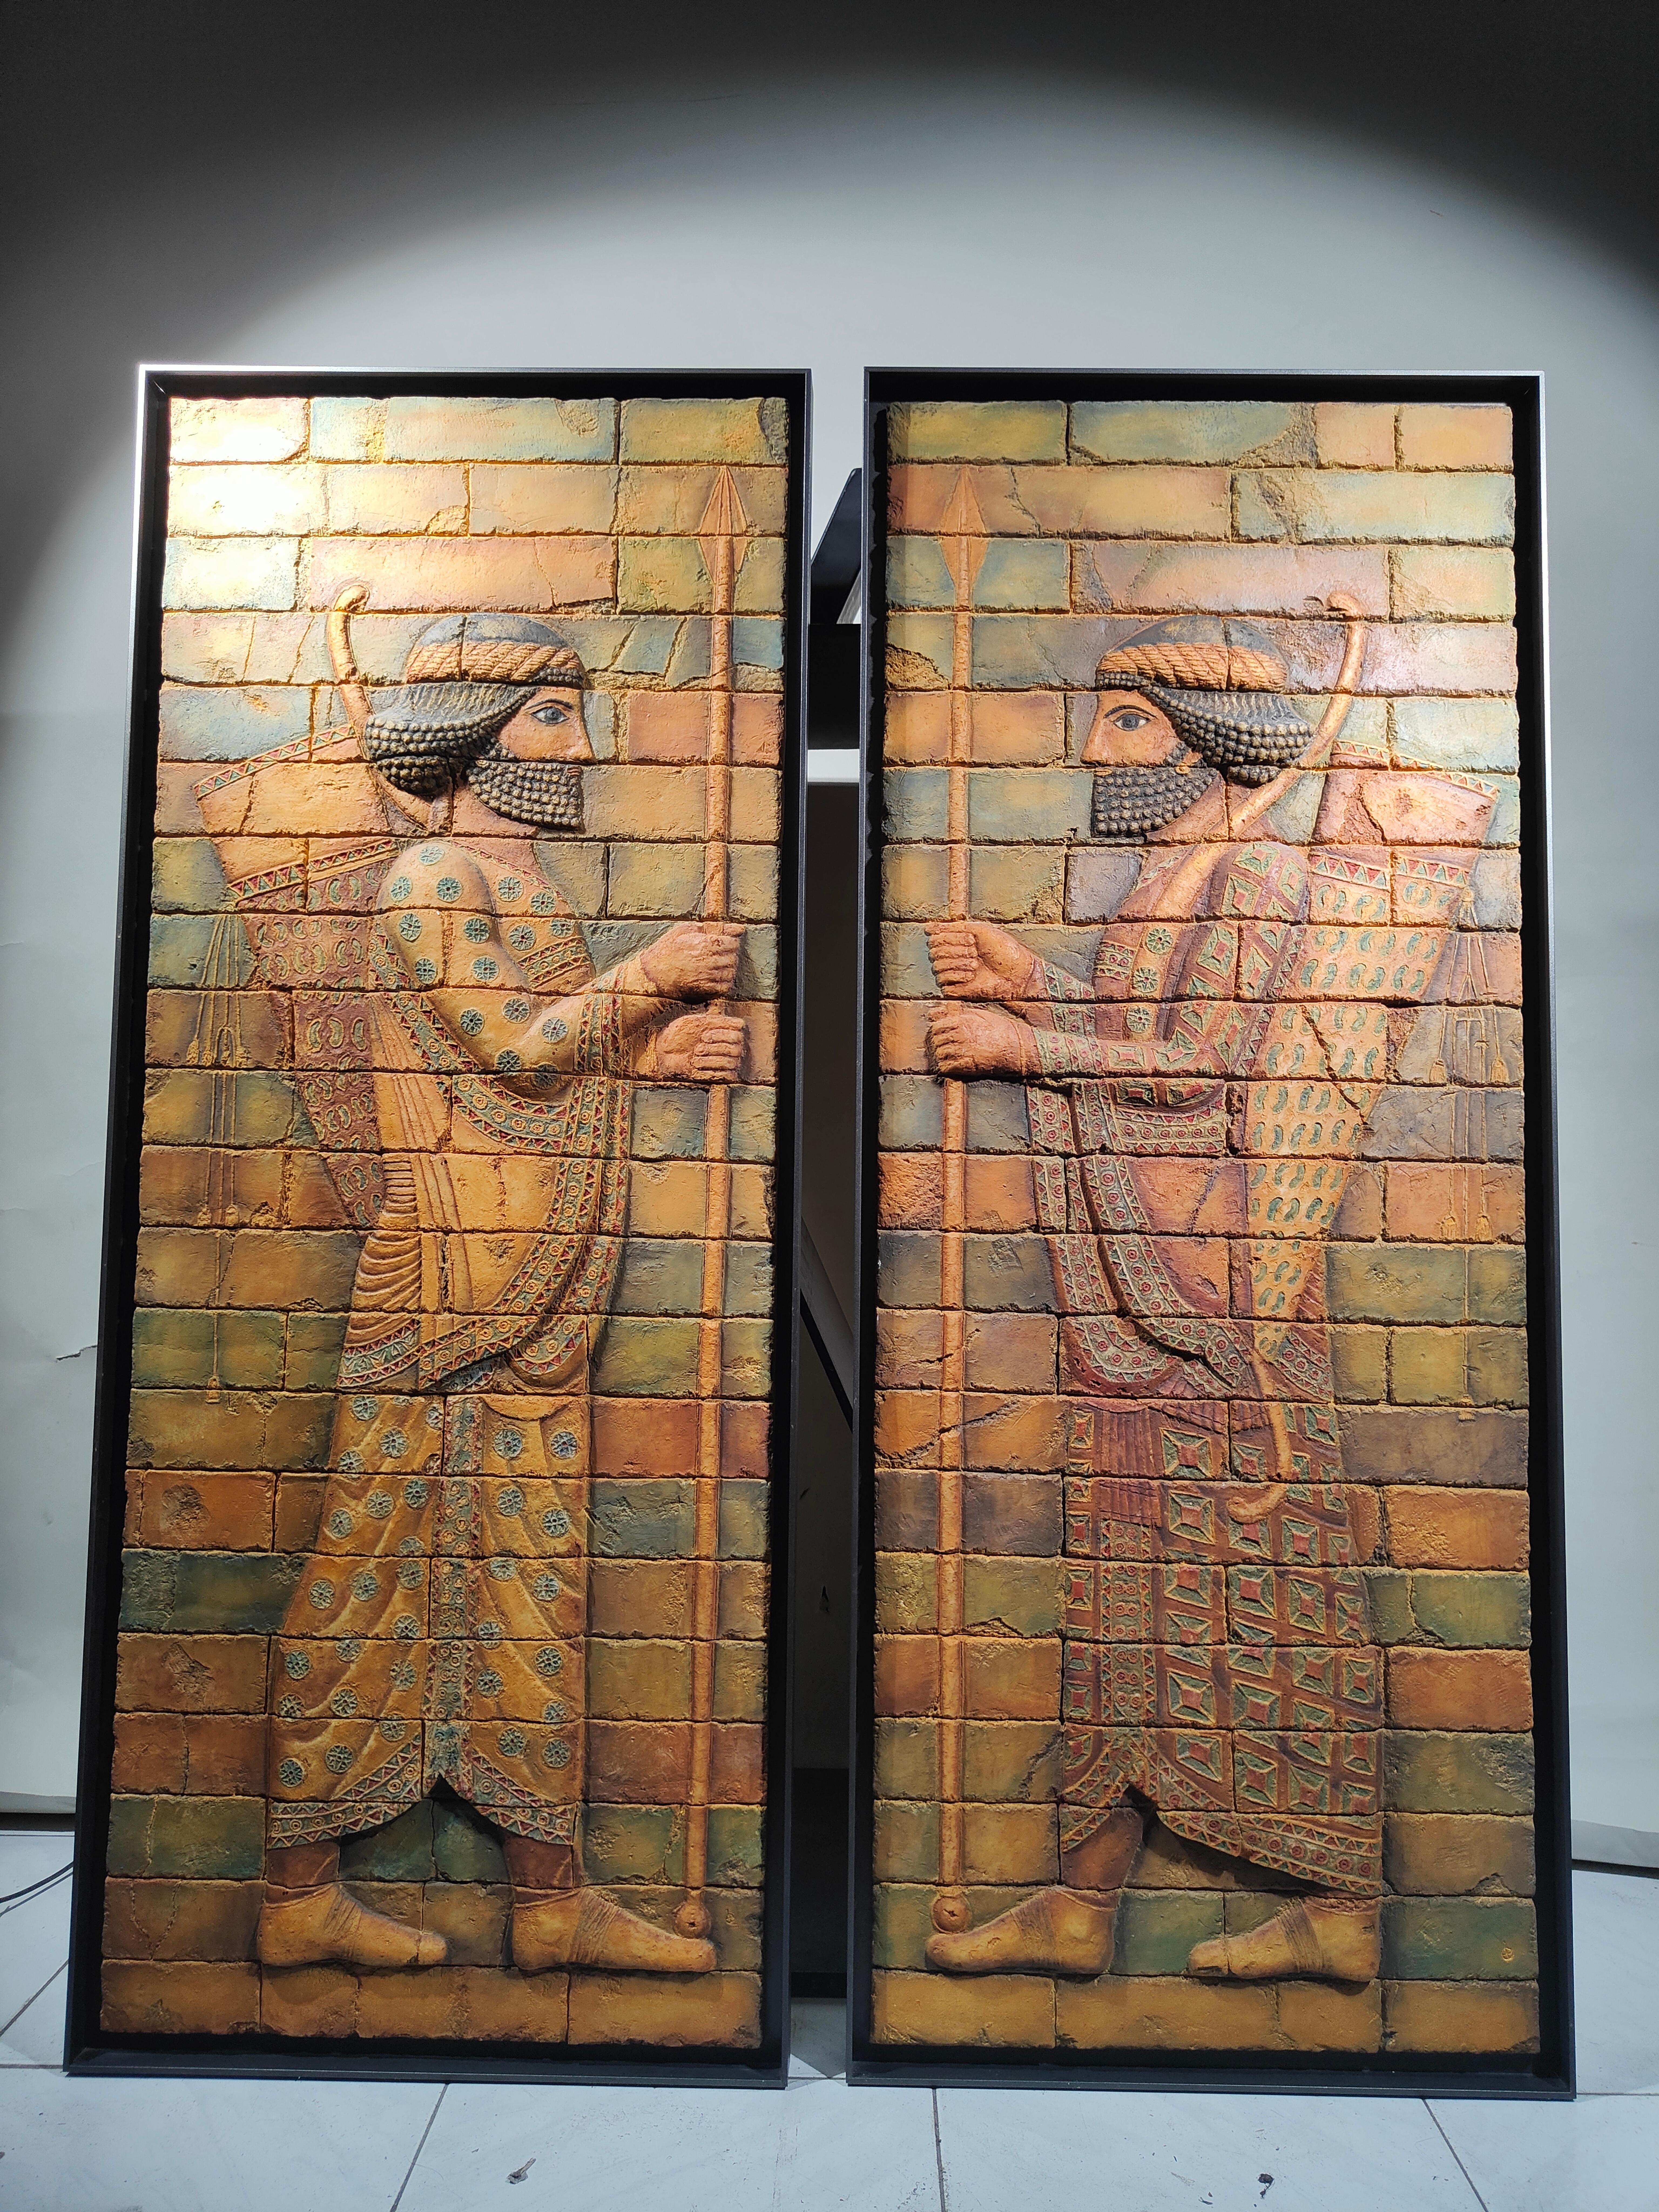 Pair Of Terracotta Reliefs Of Persian Archers Mid-20th century
Pair of terracotta reliefs of Persian archers mid-20th century
Very decorative terracotta or similar panels of Persian archers following the model of the frieze found in the Louvre